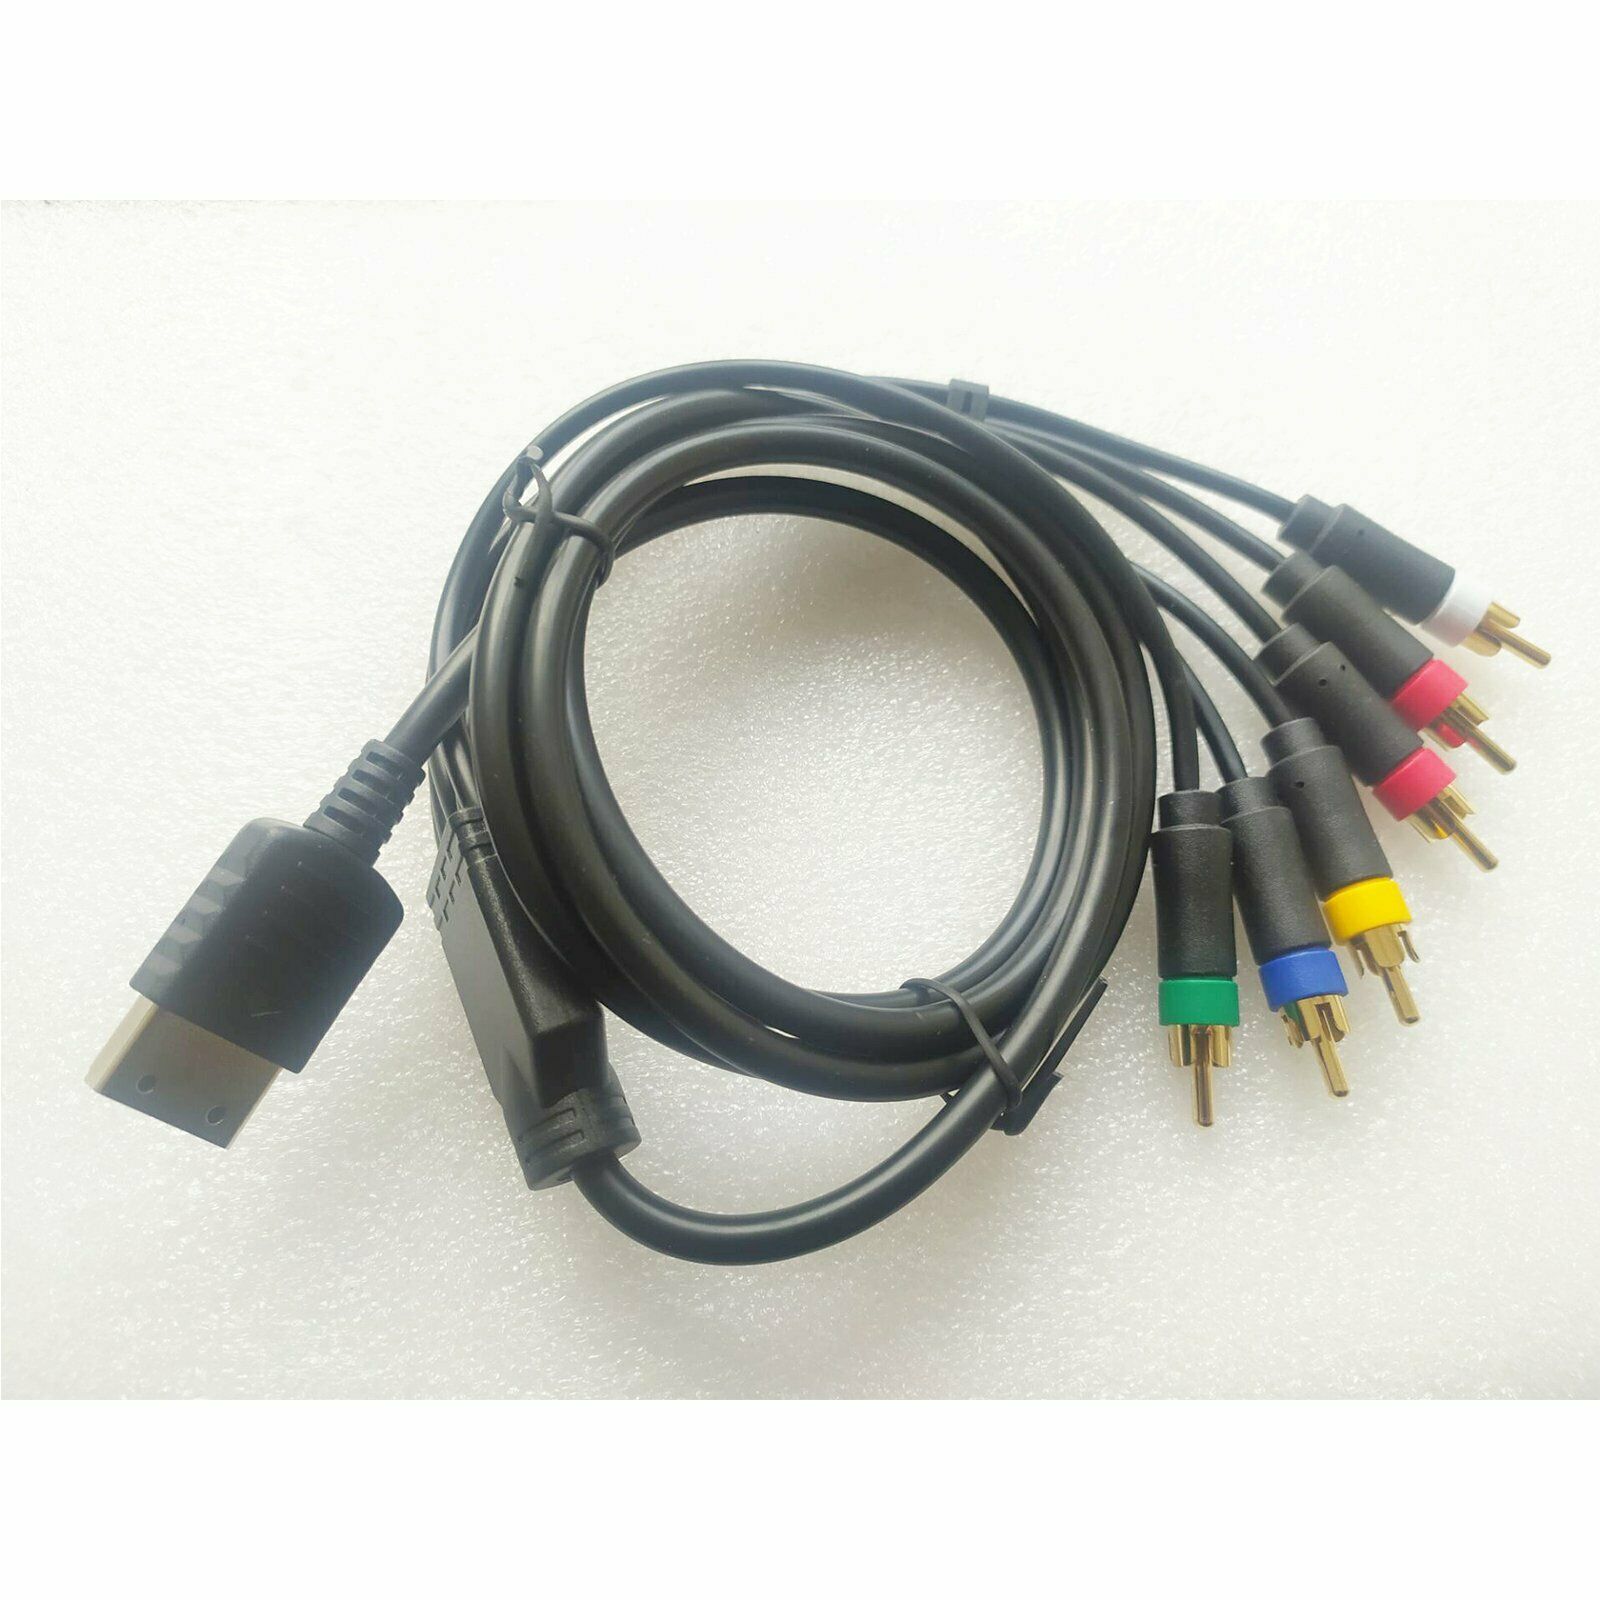 RGBS/RGB Color Monitor 128-Bit Audio Cable Adapter For Sega Dreamcast Console